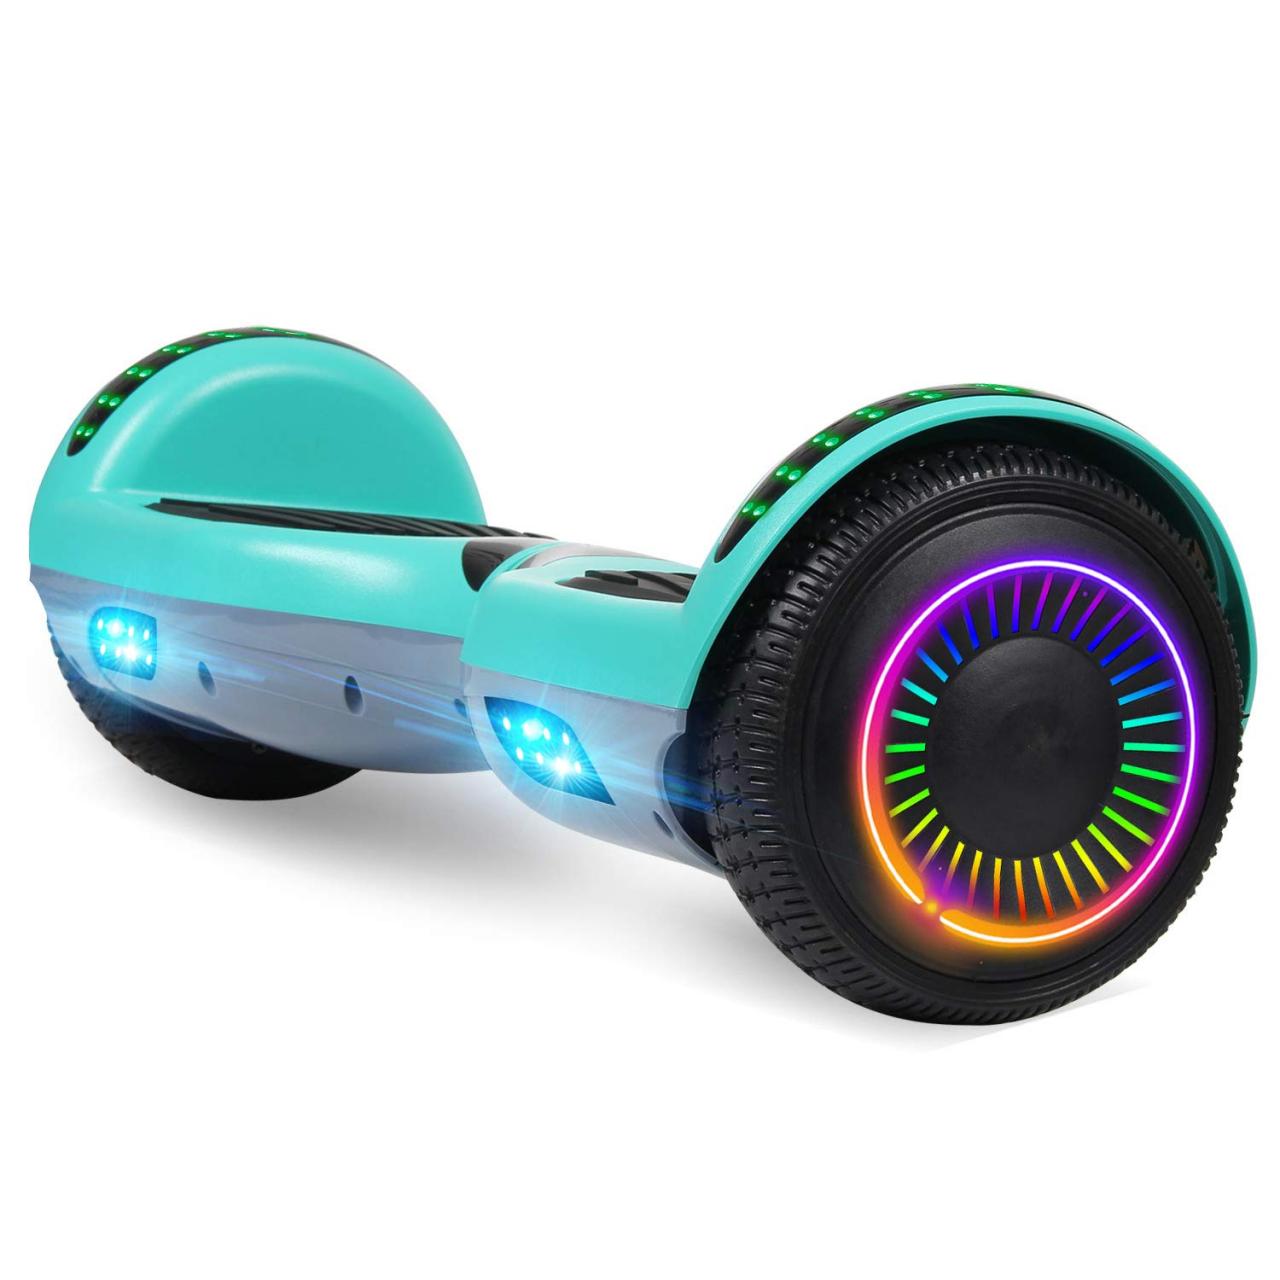 Felimoda Hoverboard,Self-Balancing Hoverboard Scooter with Bluetooth  Speakers and Fashion LED Lights,Hoverboard for Kids Ages 6-12(Green-Gray)-  Buy Online in Ecuador at desertcart.ec. ProductId : 122609006.